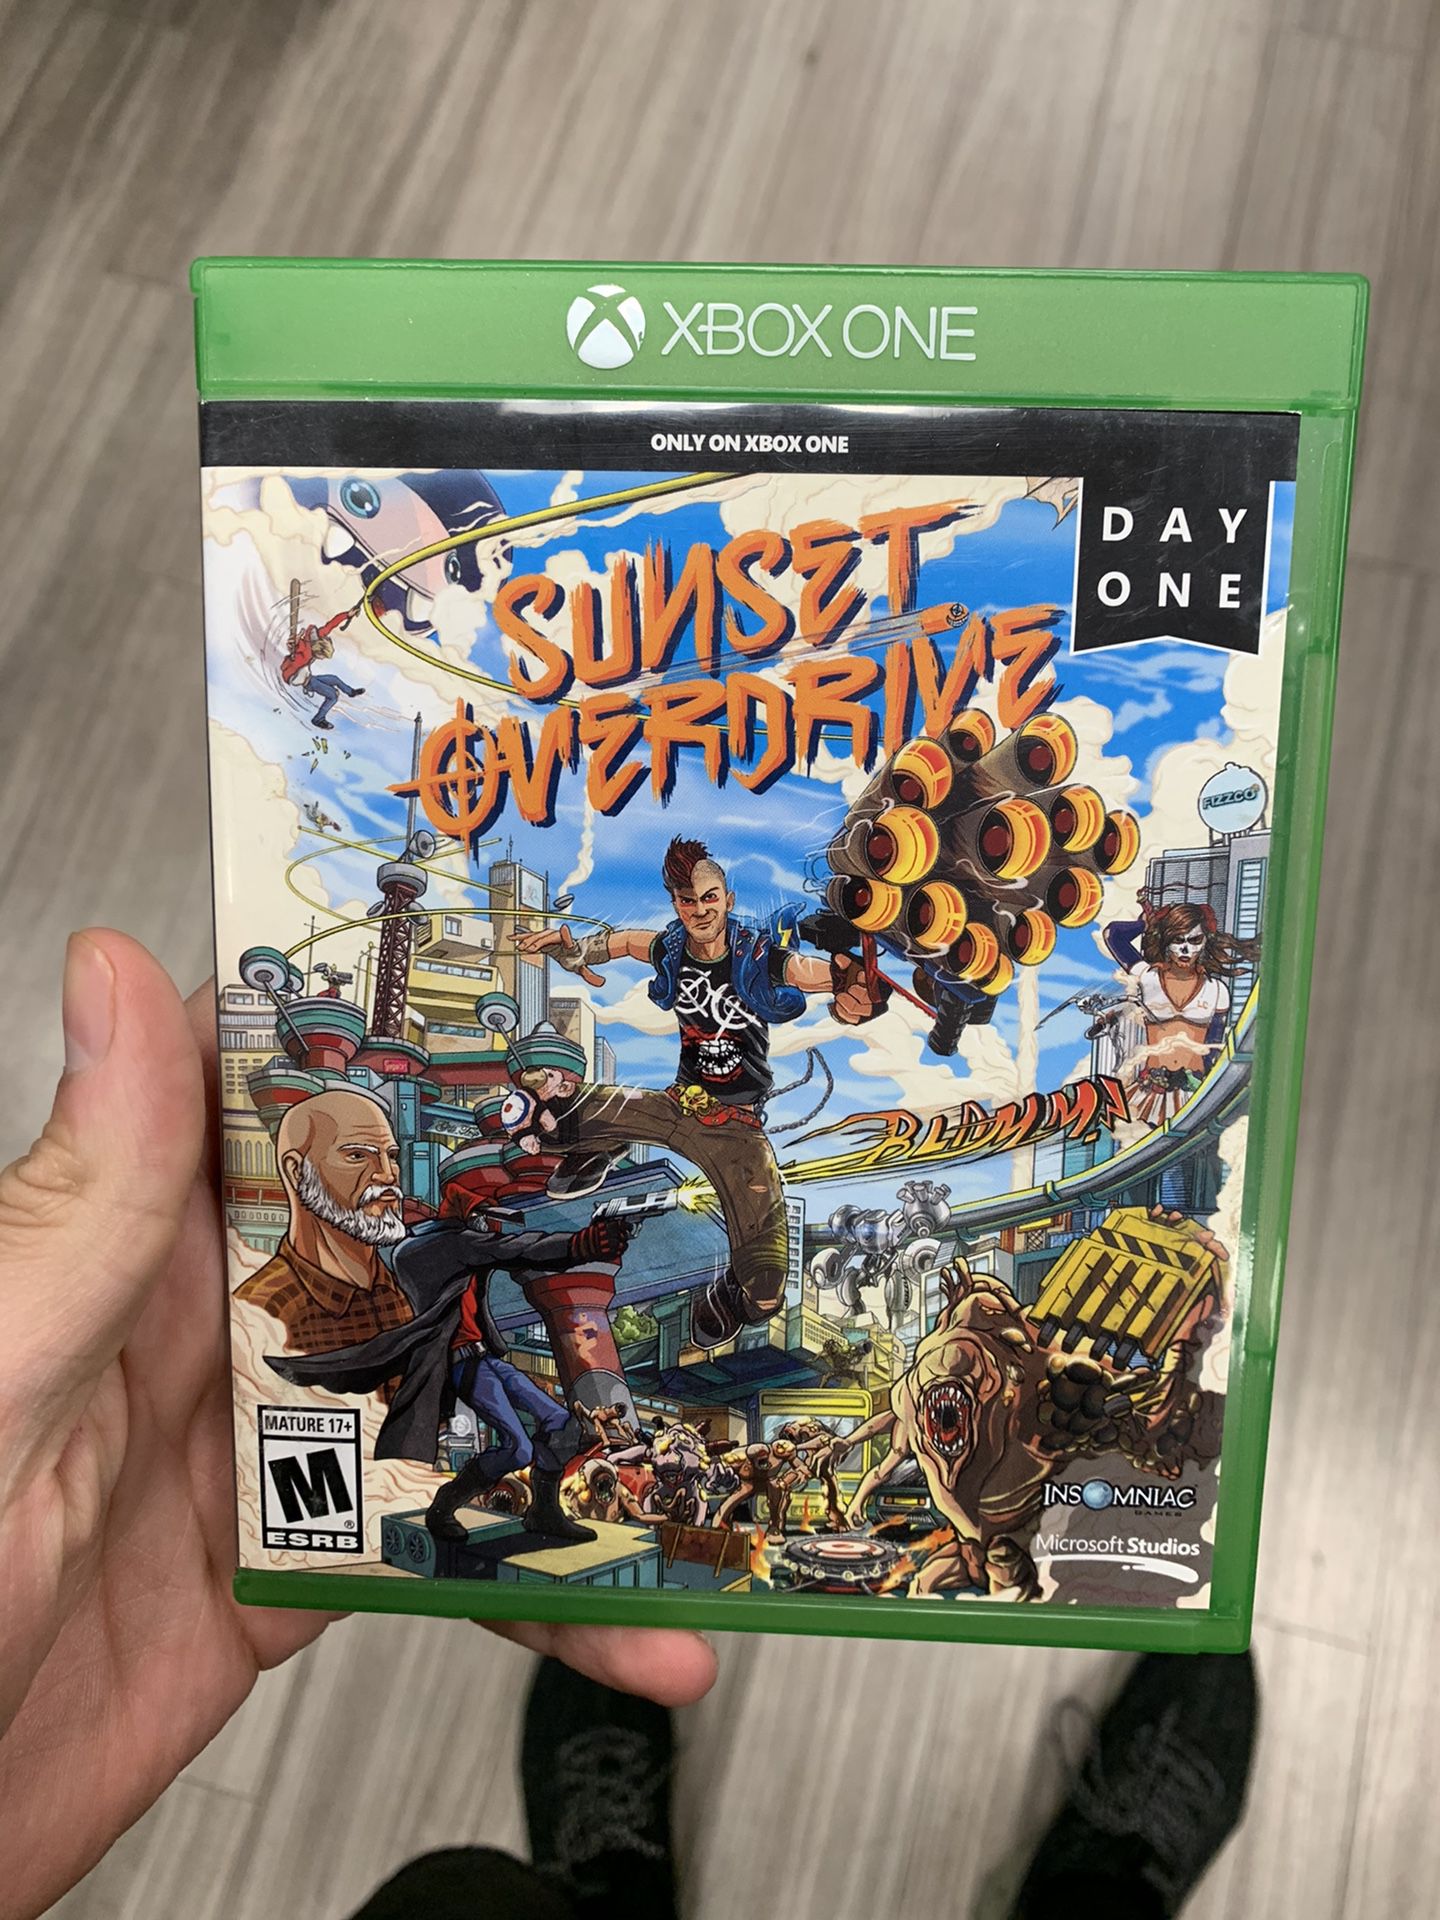 Sunset overdrive for trade